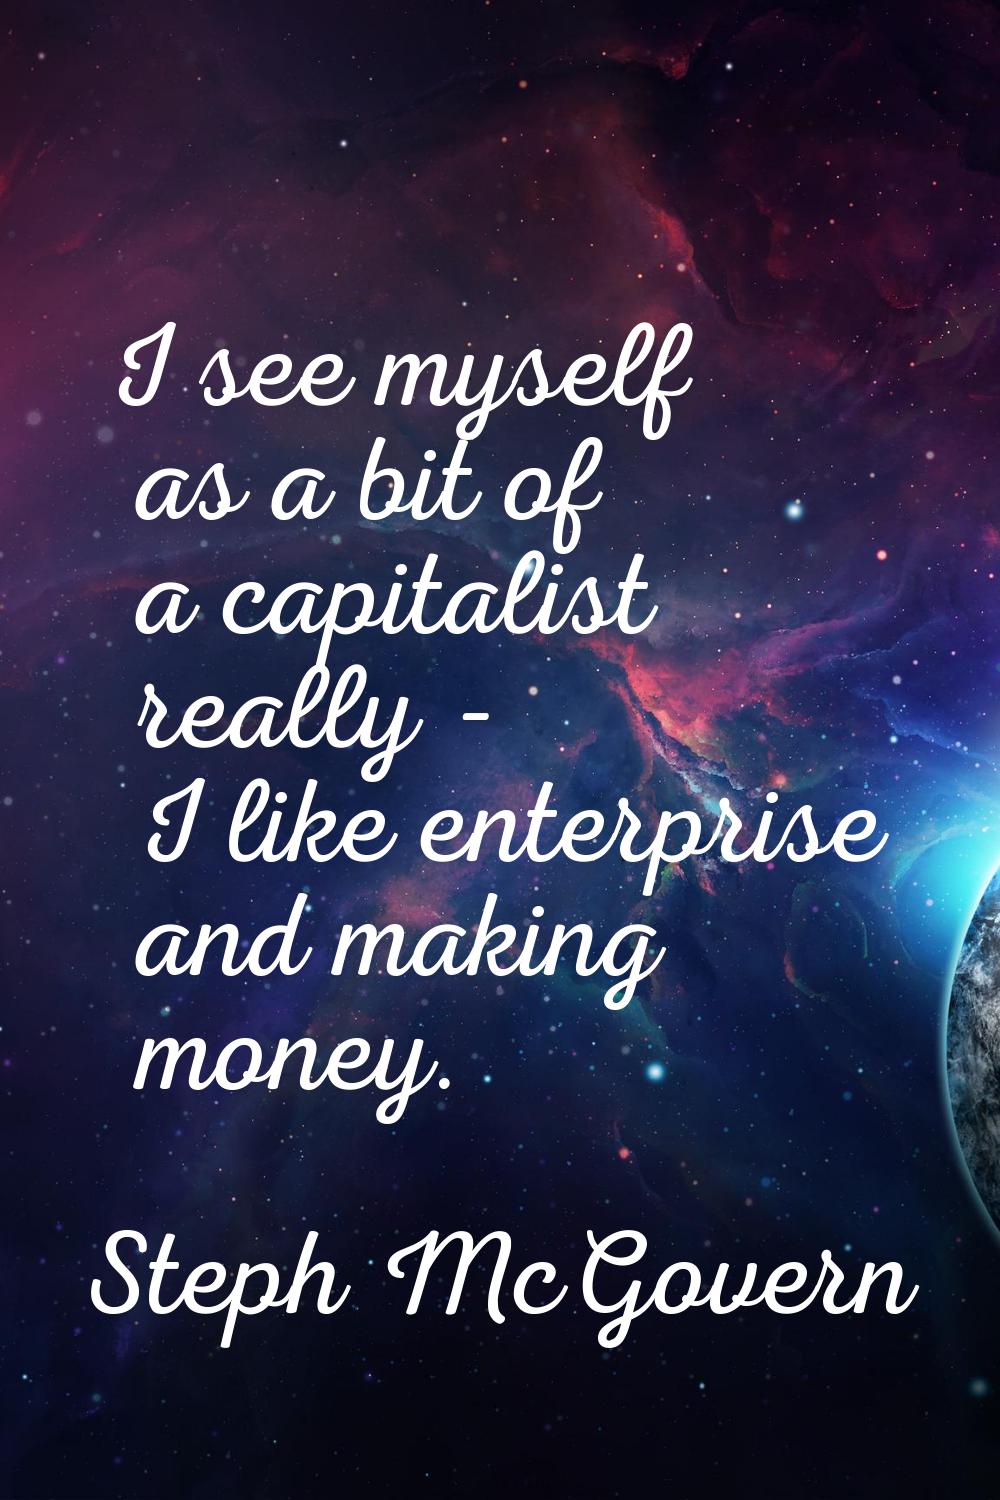 I see myself as a bit of a capitalist really - I like enterprise and making money.